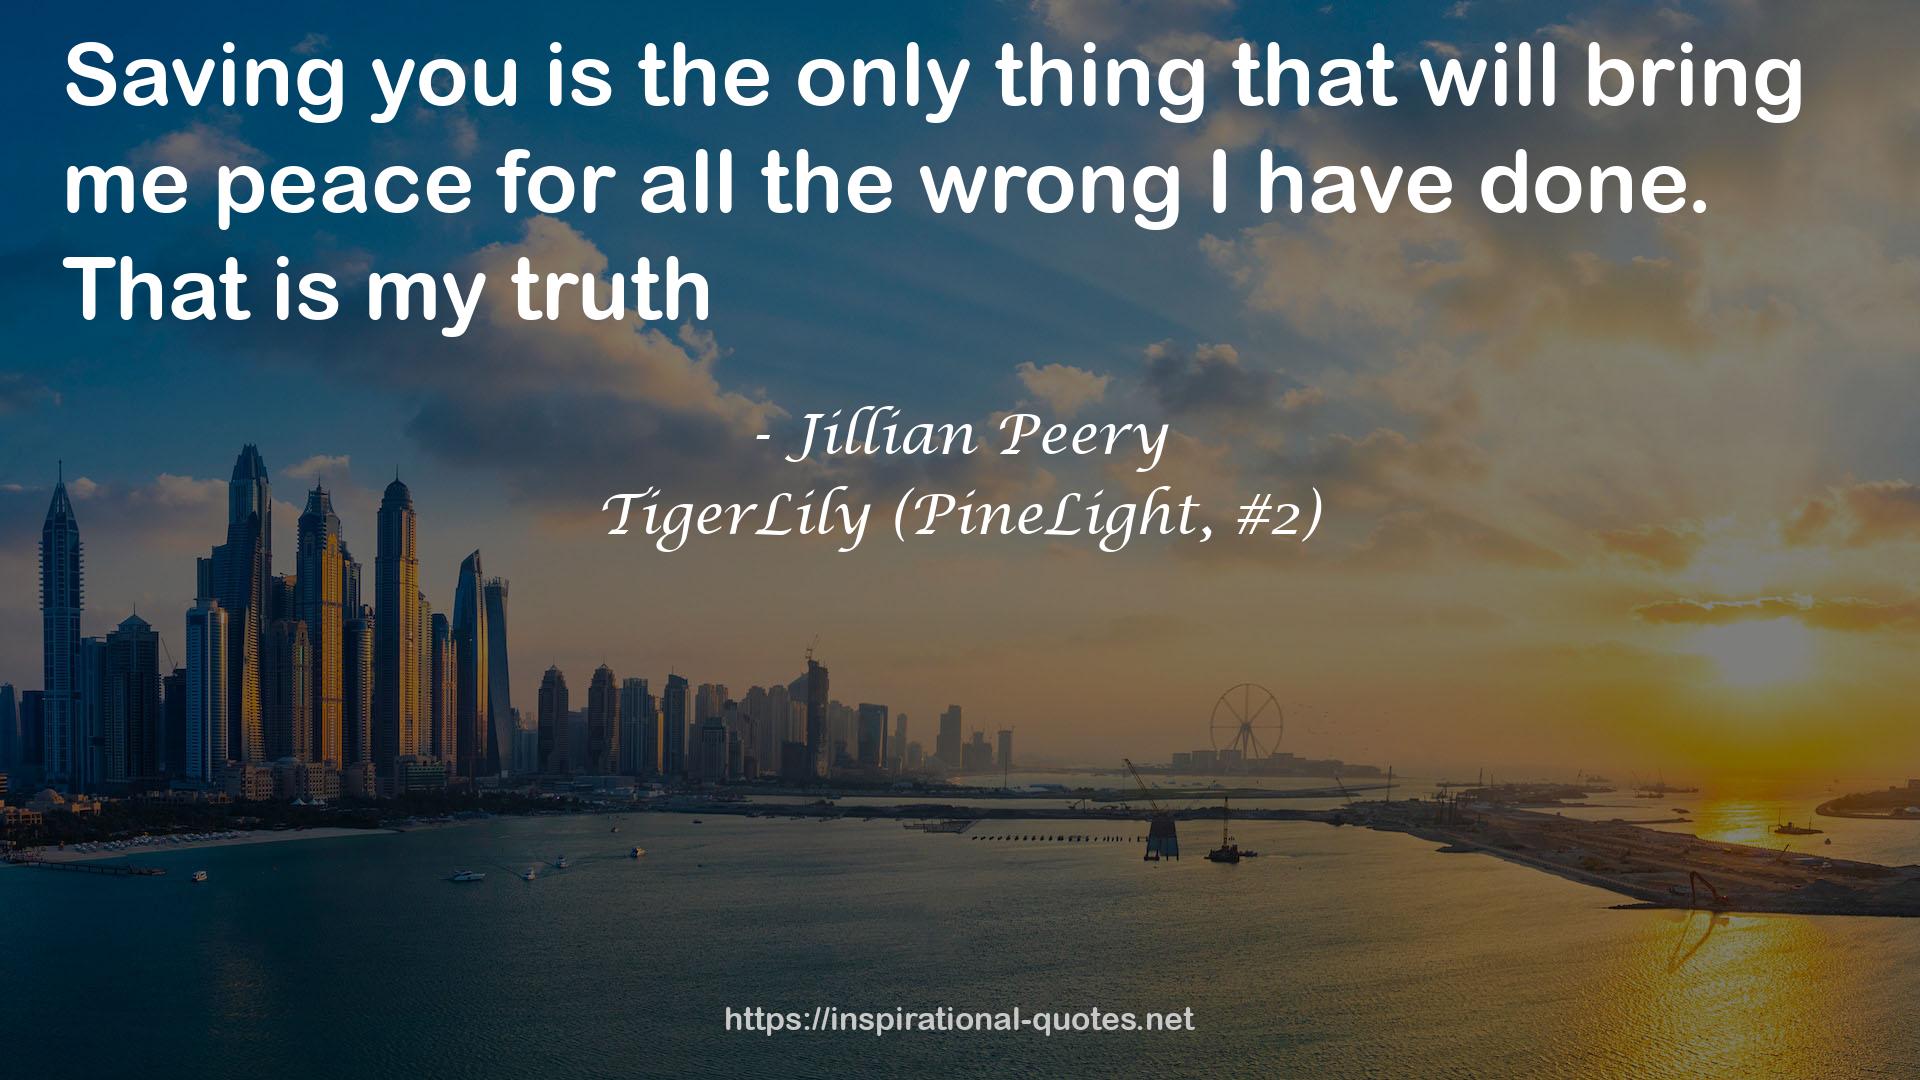 TigerLily (PineLight, #2) QUOTES